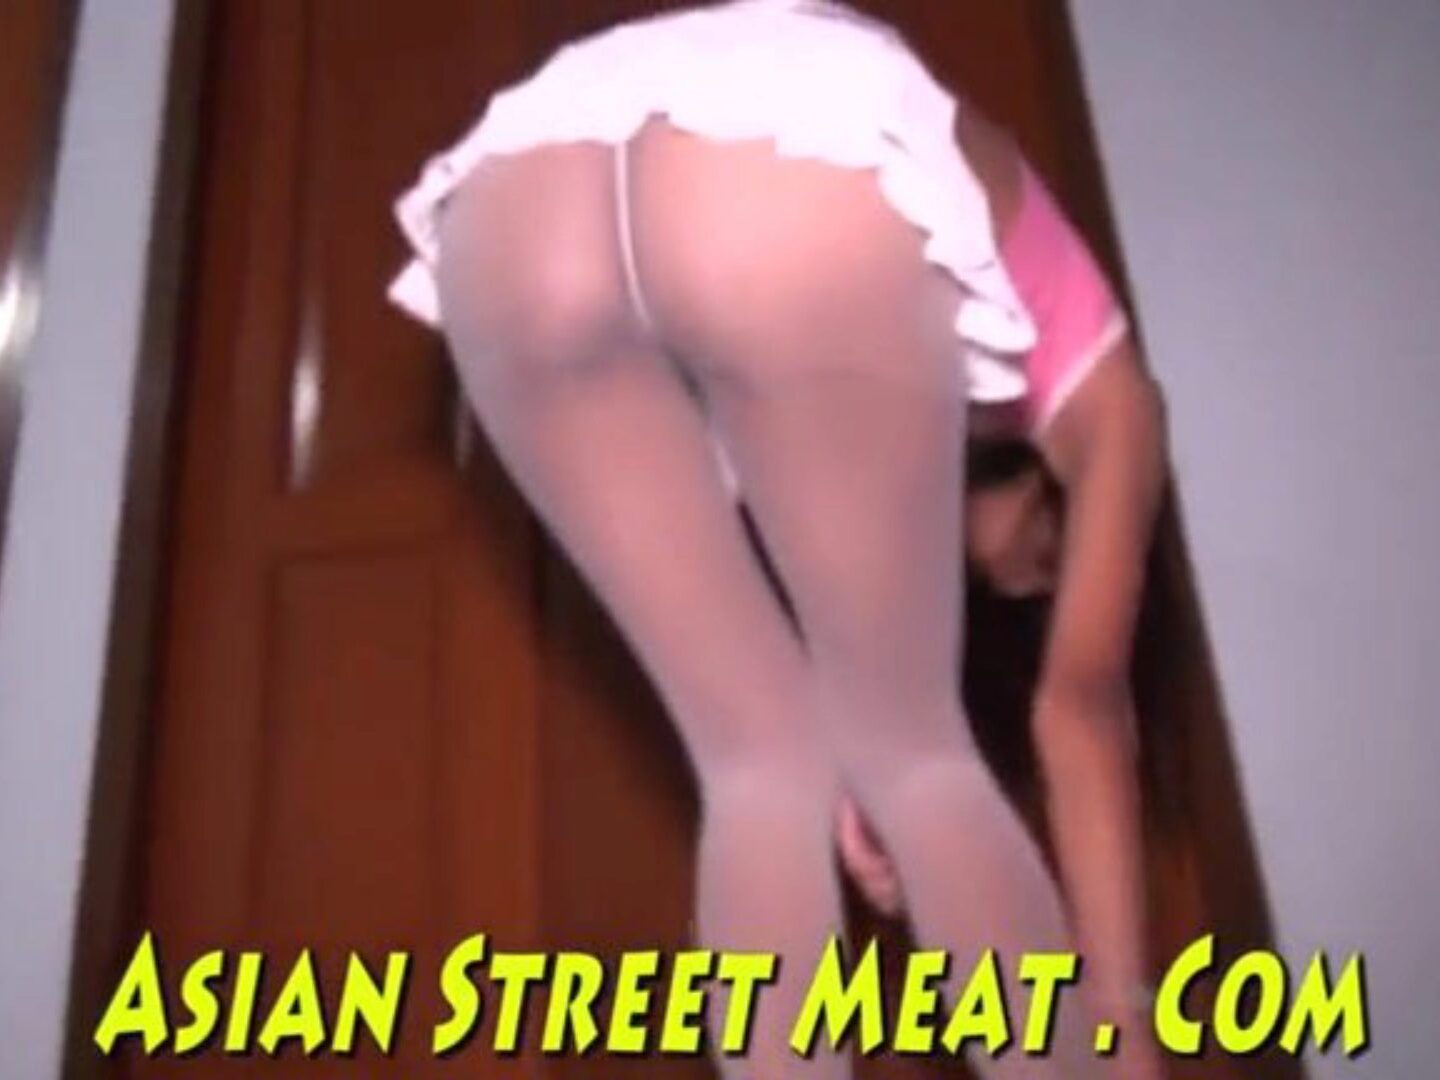 Asian Street Meat Xxx Submissive